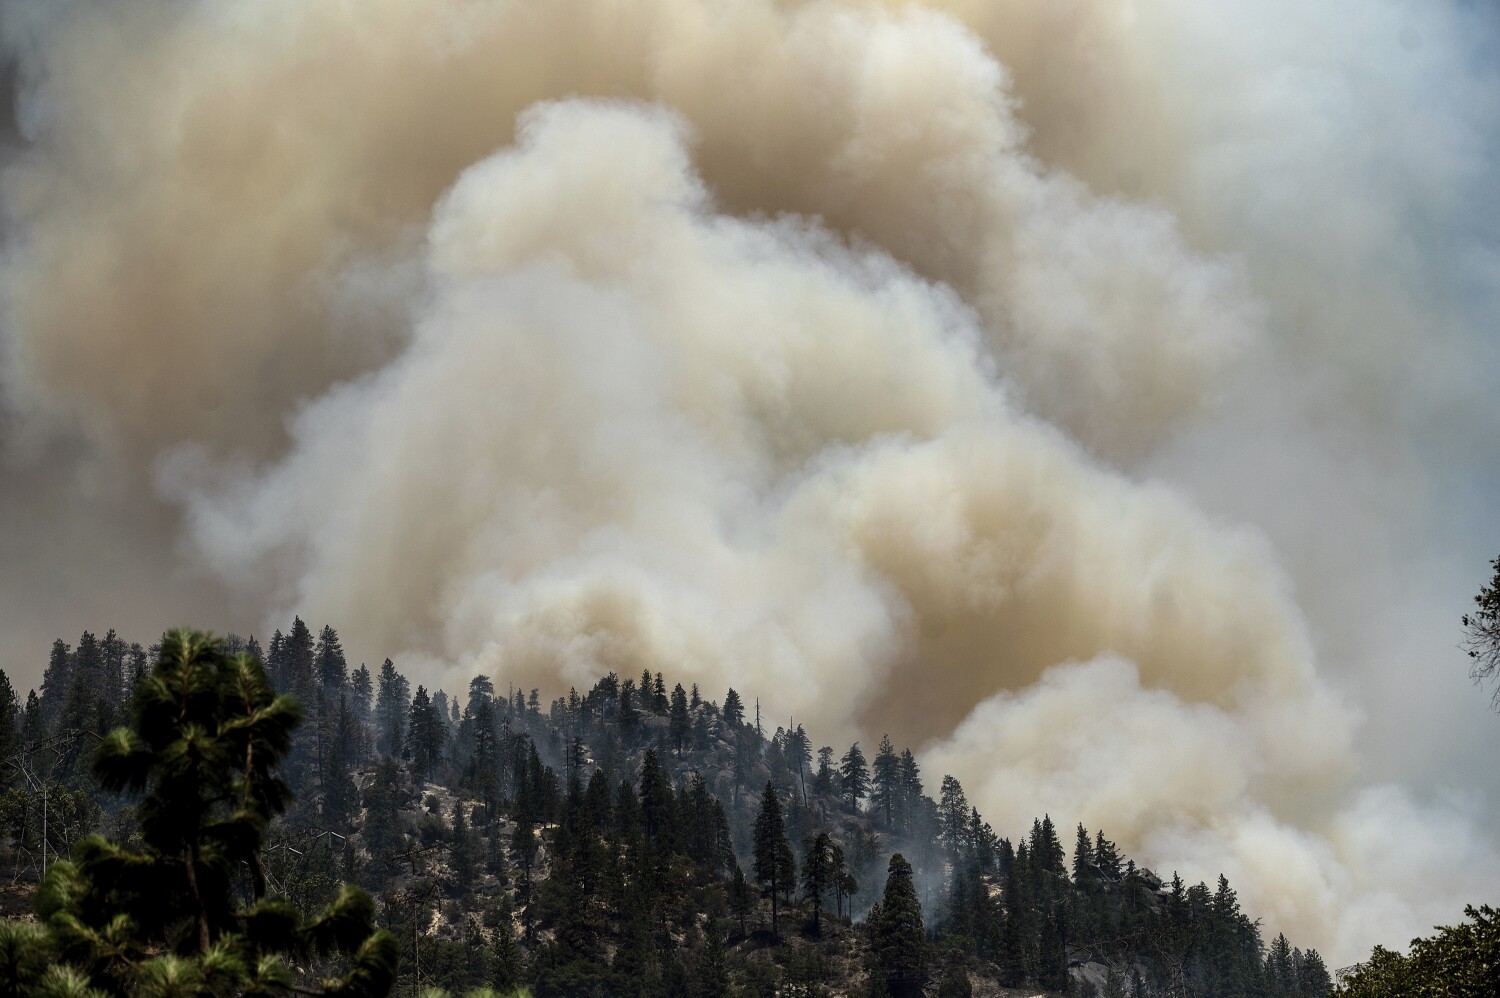 Dixie fire becomes largest in California while crews struggle to gain footing on Tamarack blaze